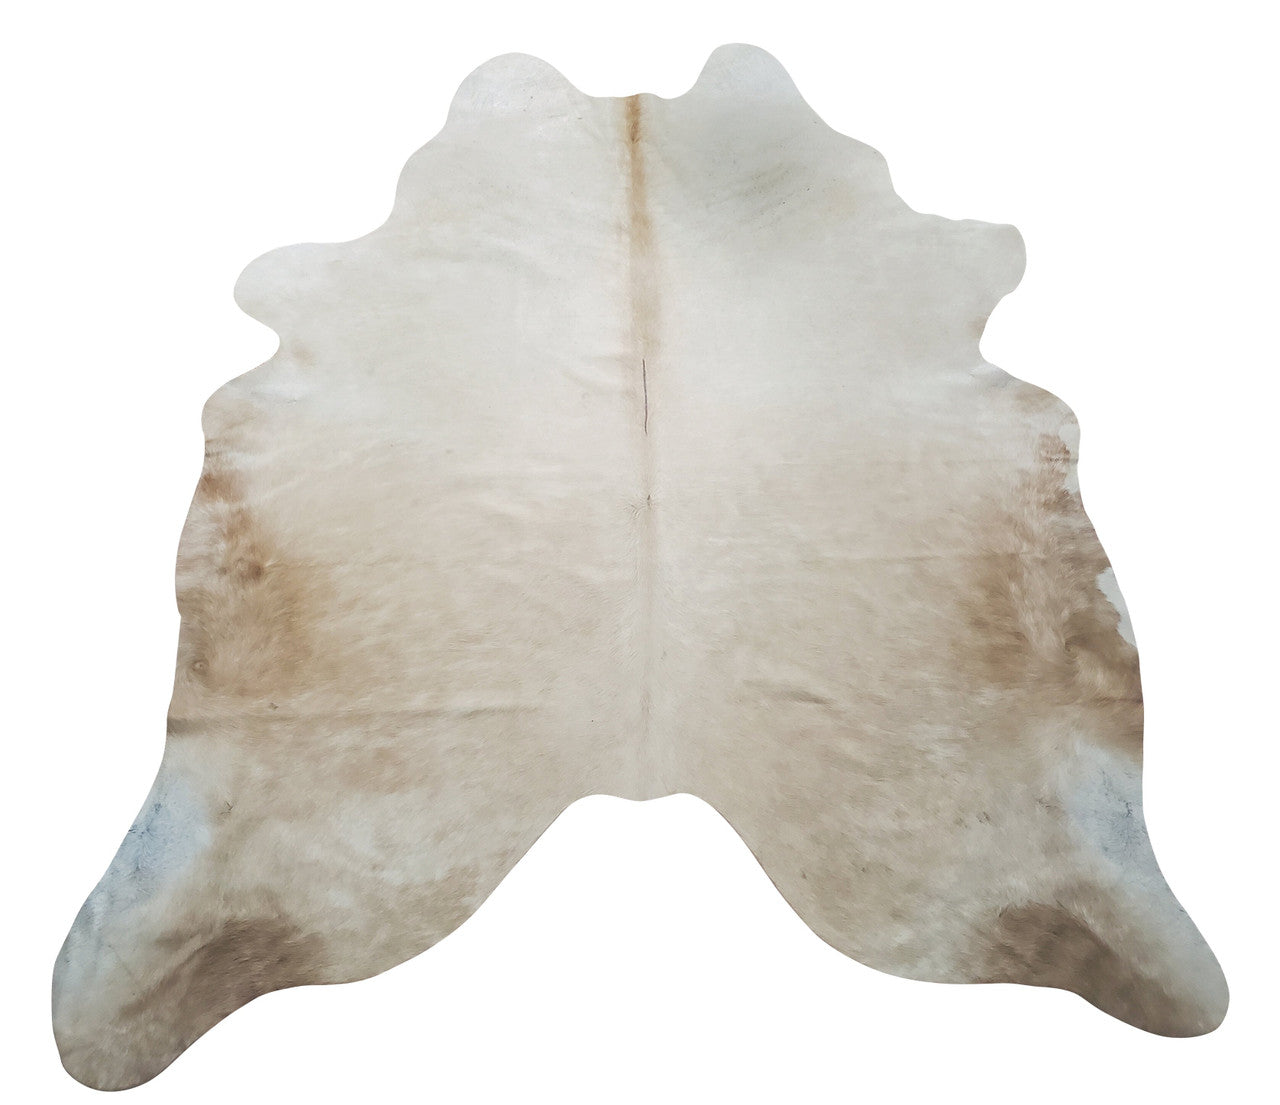 I purchased this extra small cowhide rug for my bedroom and it is absolutely beautiful! 
